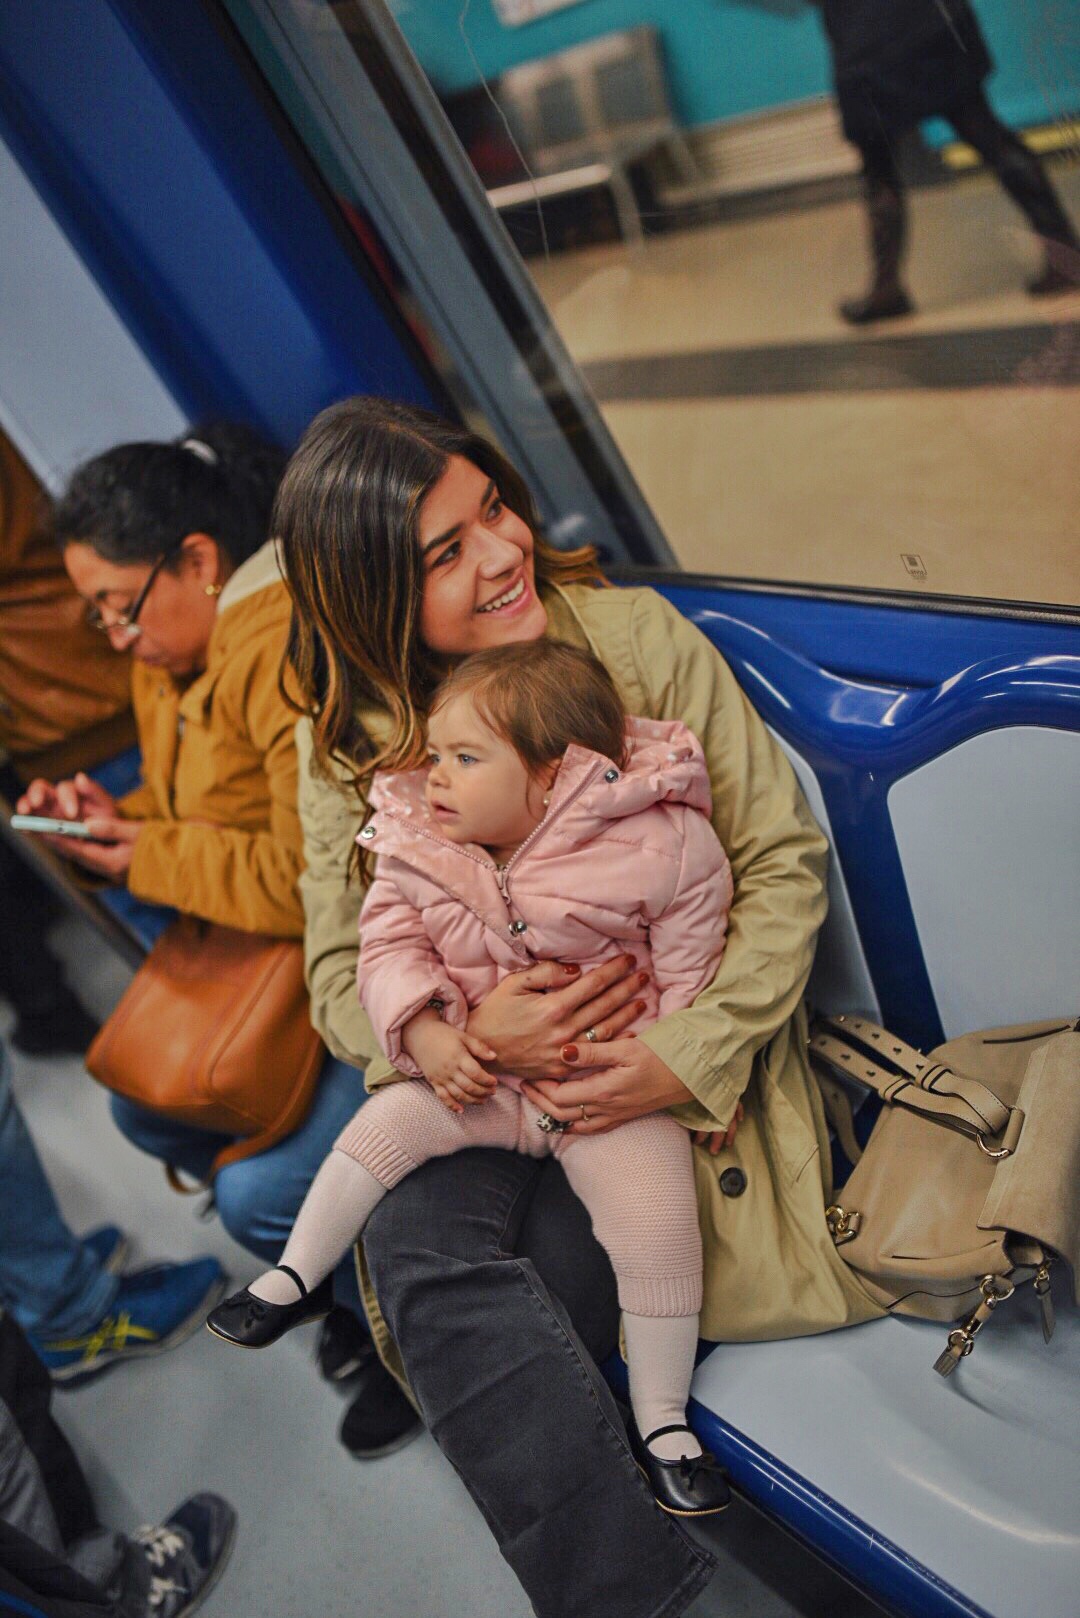 Carolina Hellal and her baby sofia at a trian station in Madrid, Spain.